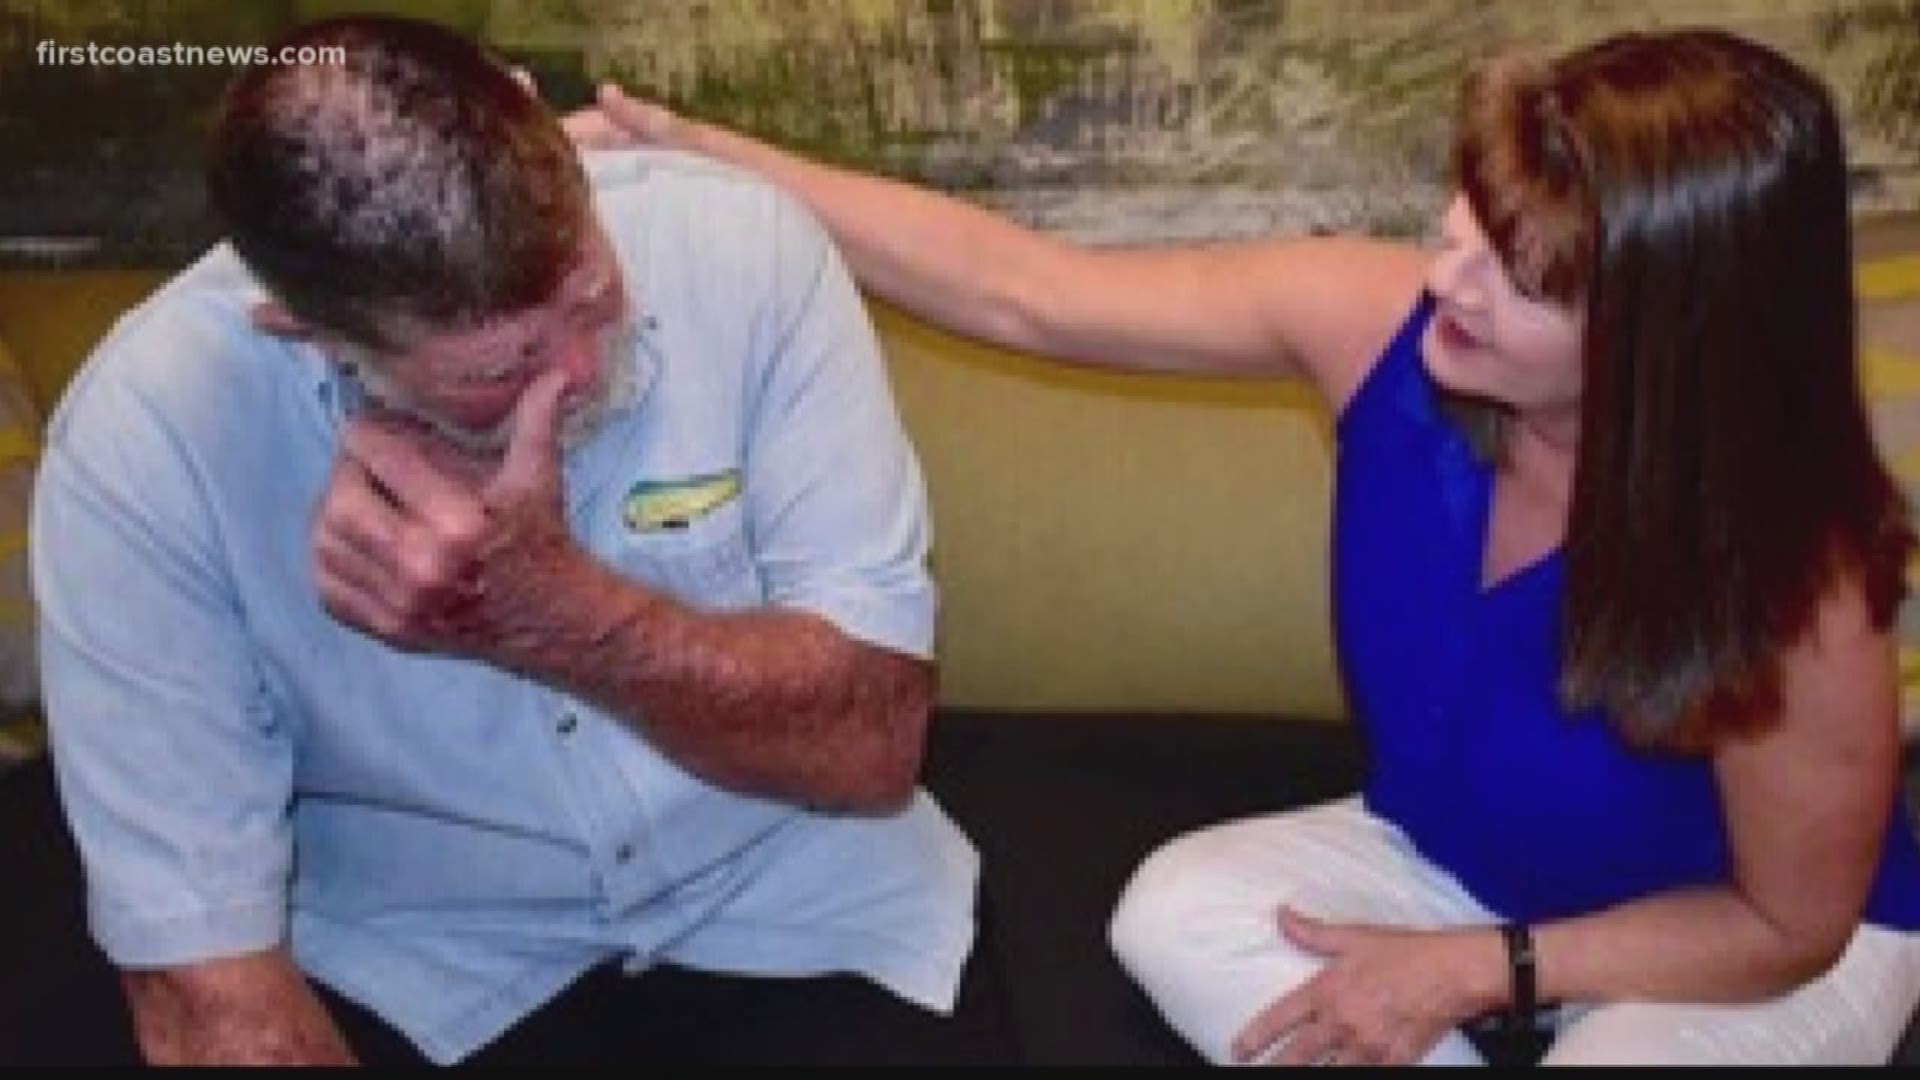 After years of searching, a Jacksonville woman meets her biological dad for the first time.